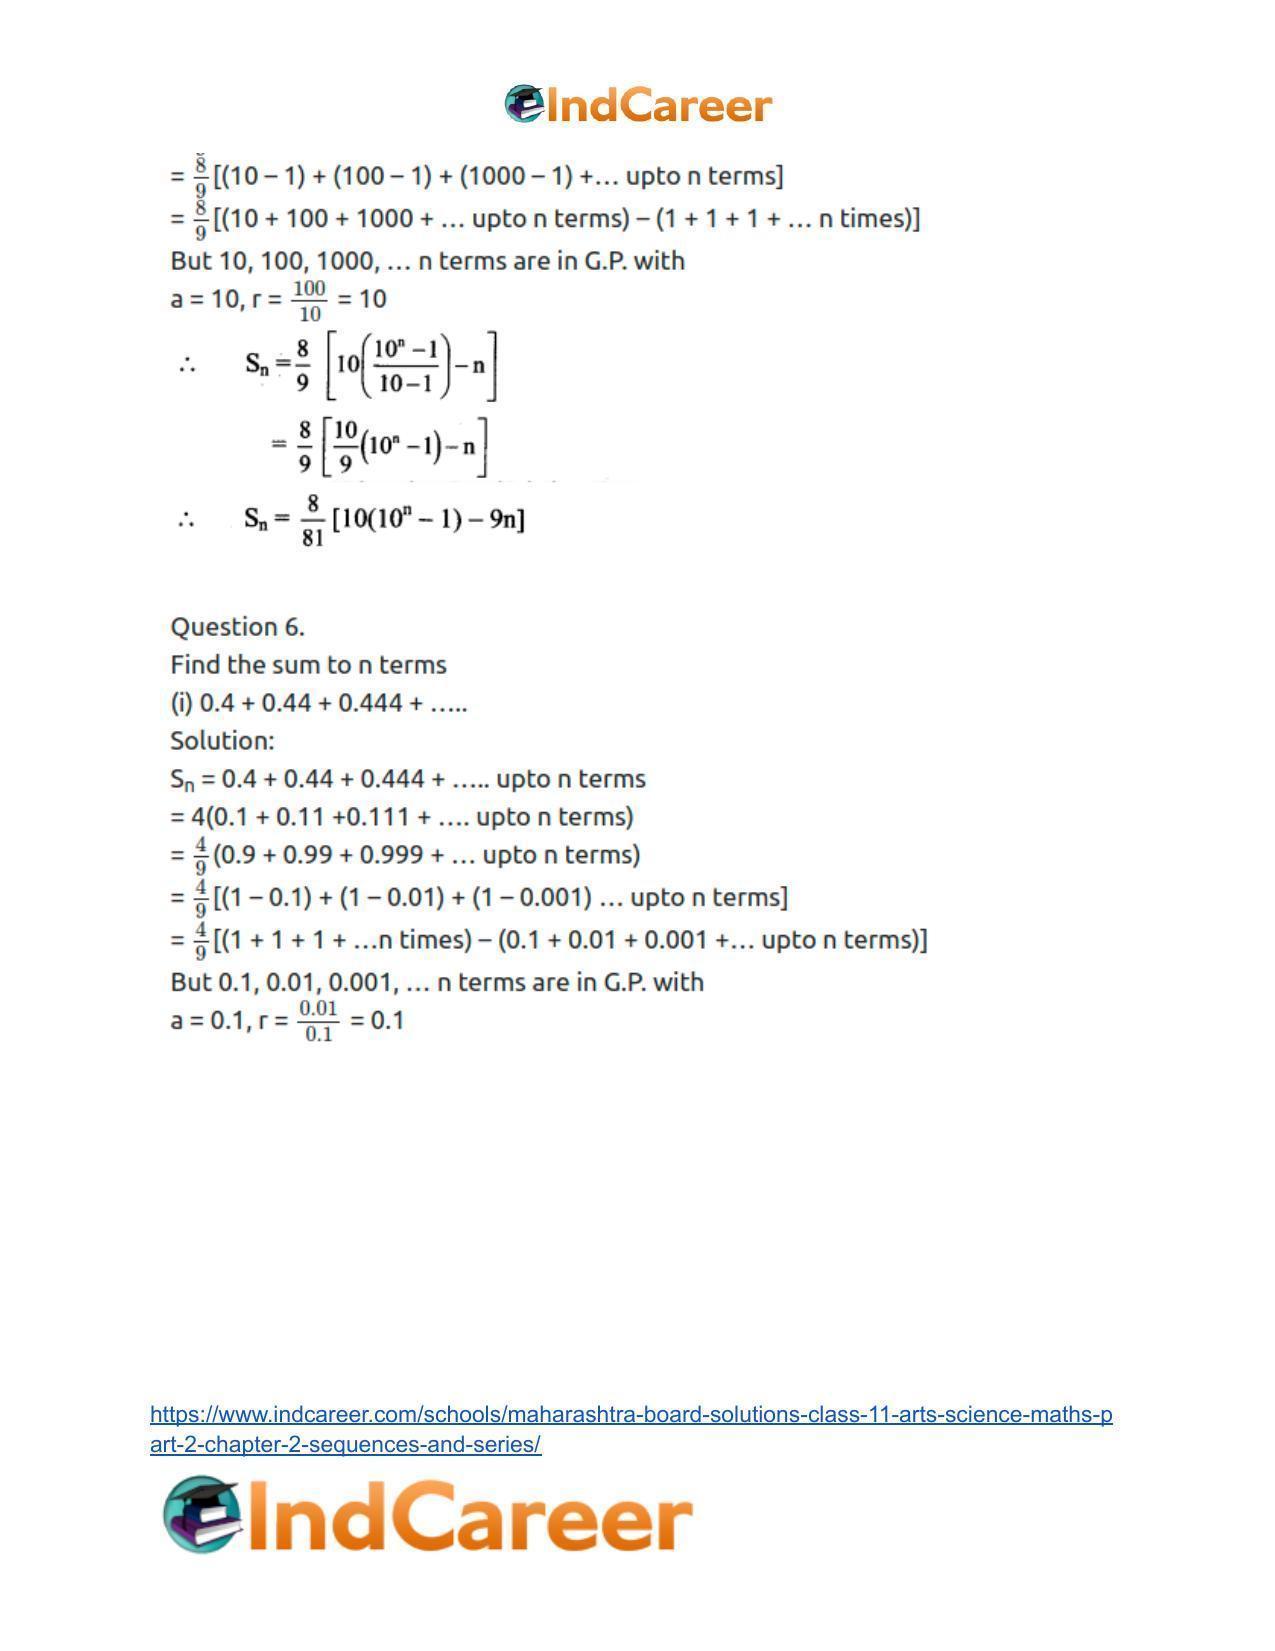 Maharashtra Board Solutions Class 11-Arts & Science Maths (Part 2): Chapter 2- Sequences and Series - Page 30